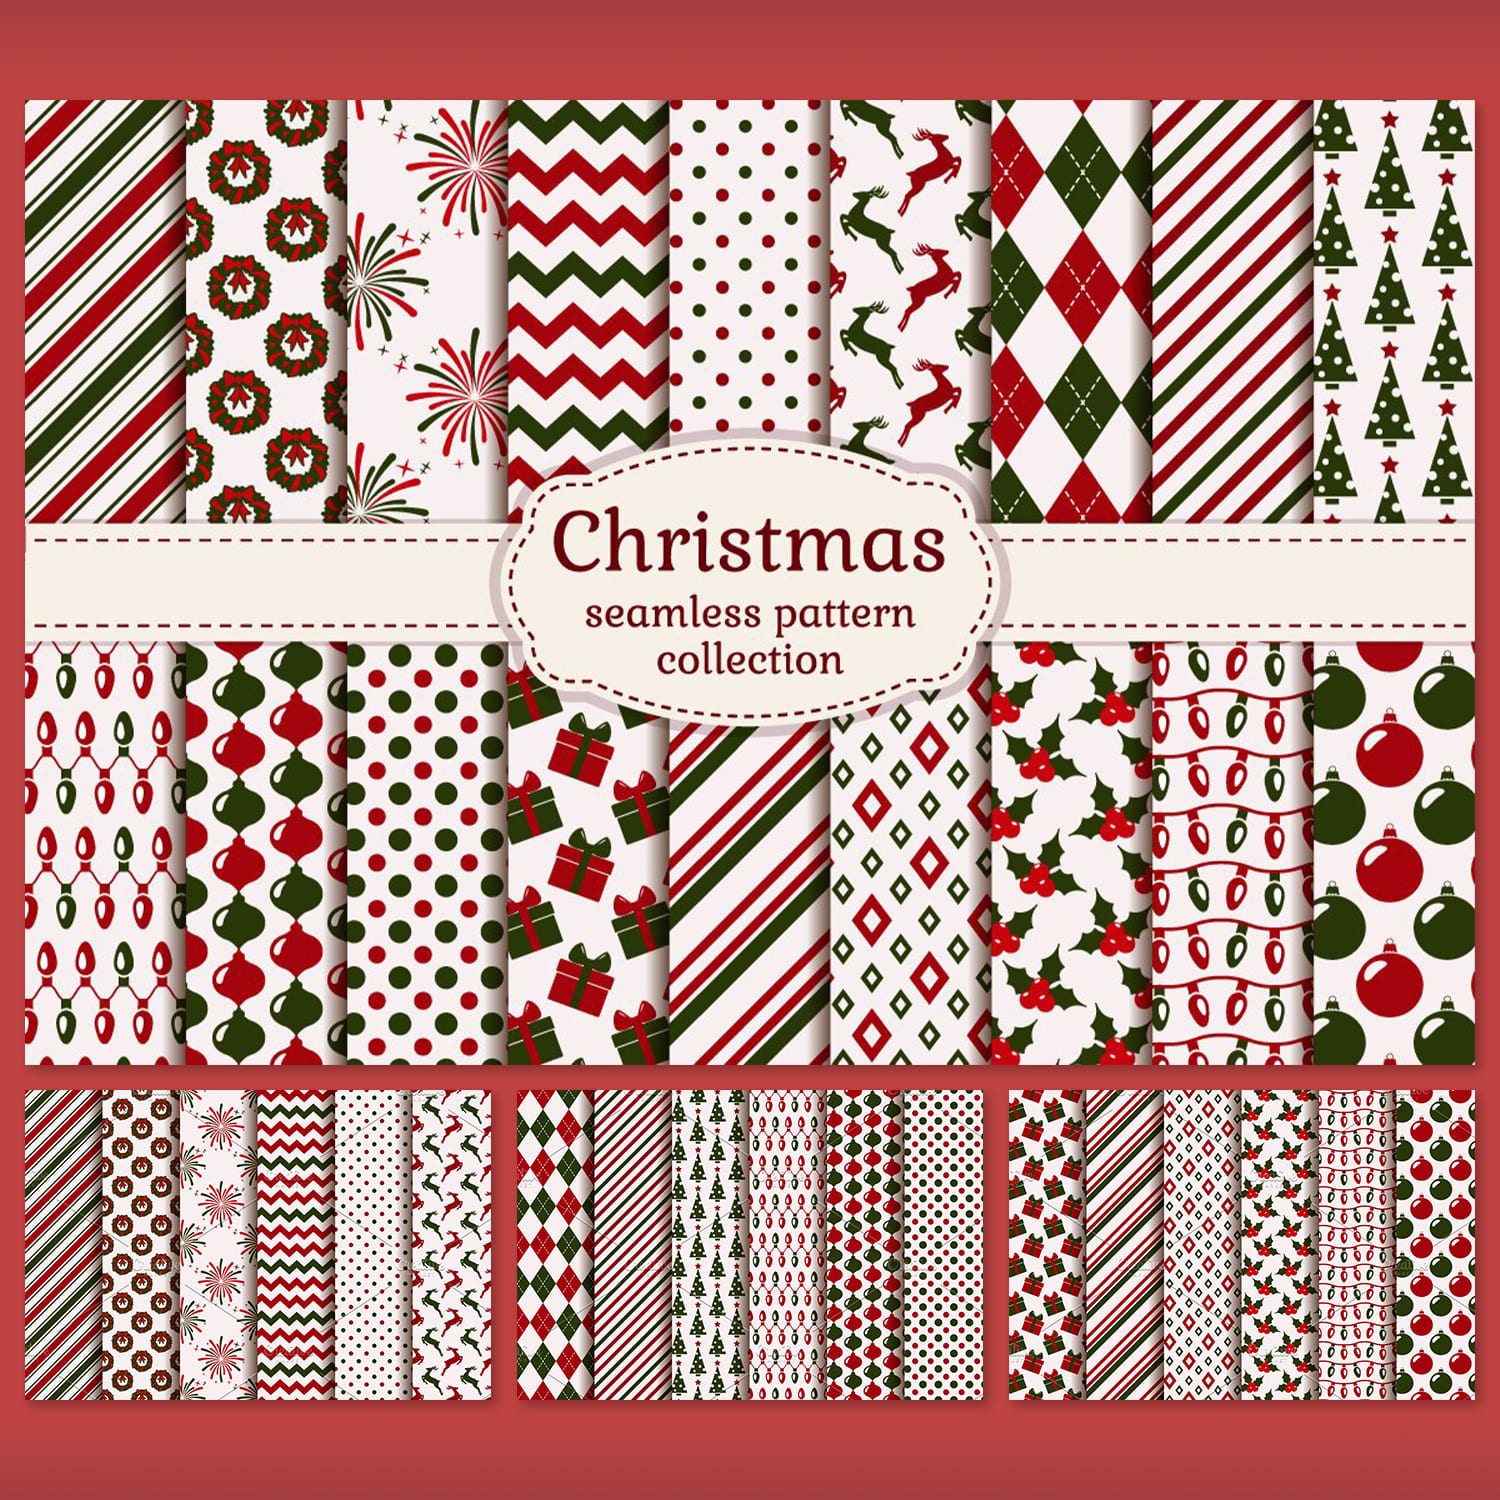 Christmas seamless patterns cover.